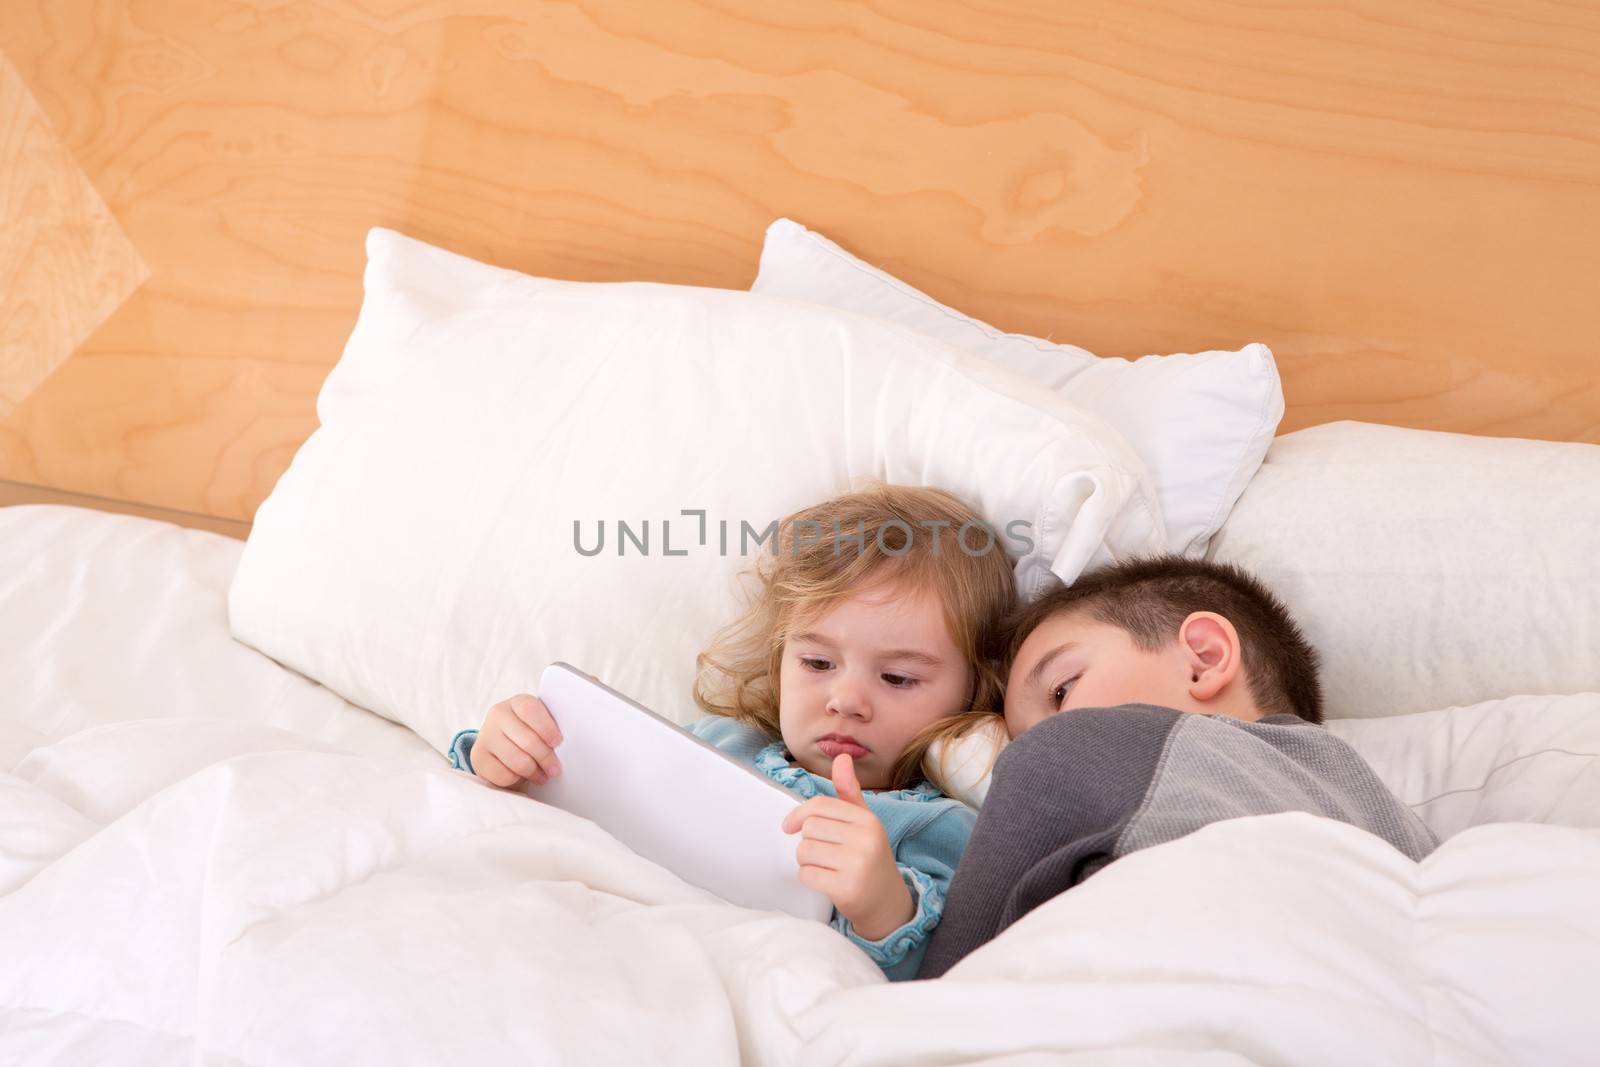 Tired little brother and sister snuggling up together in a warm comfortable bed as they read a bedtime story on a tablet computer before falling asleep